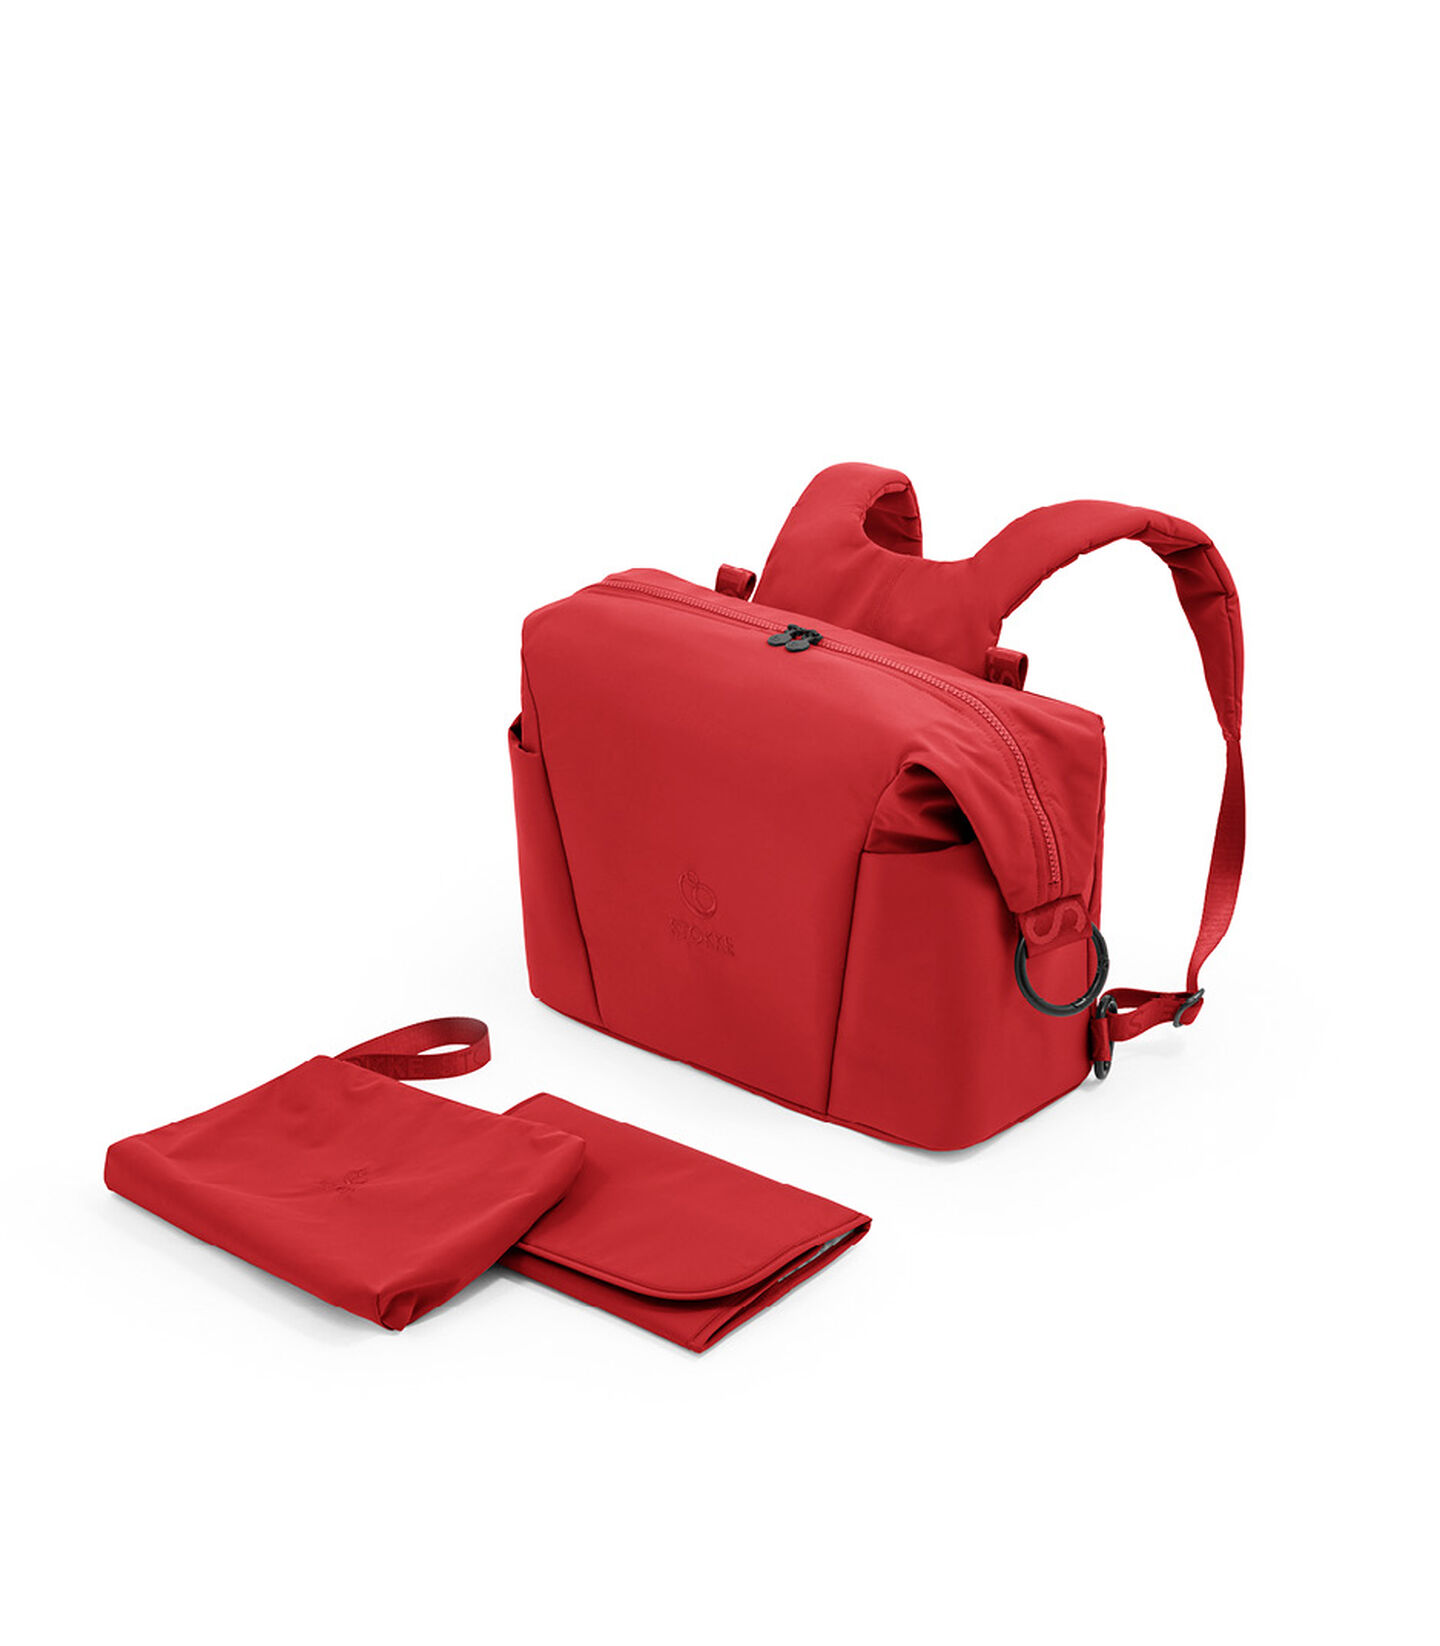 Stokke® Xplory® X Changing Bag Ruby Red. Accessories. What's Included. view 3